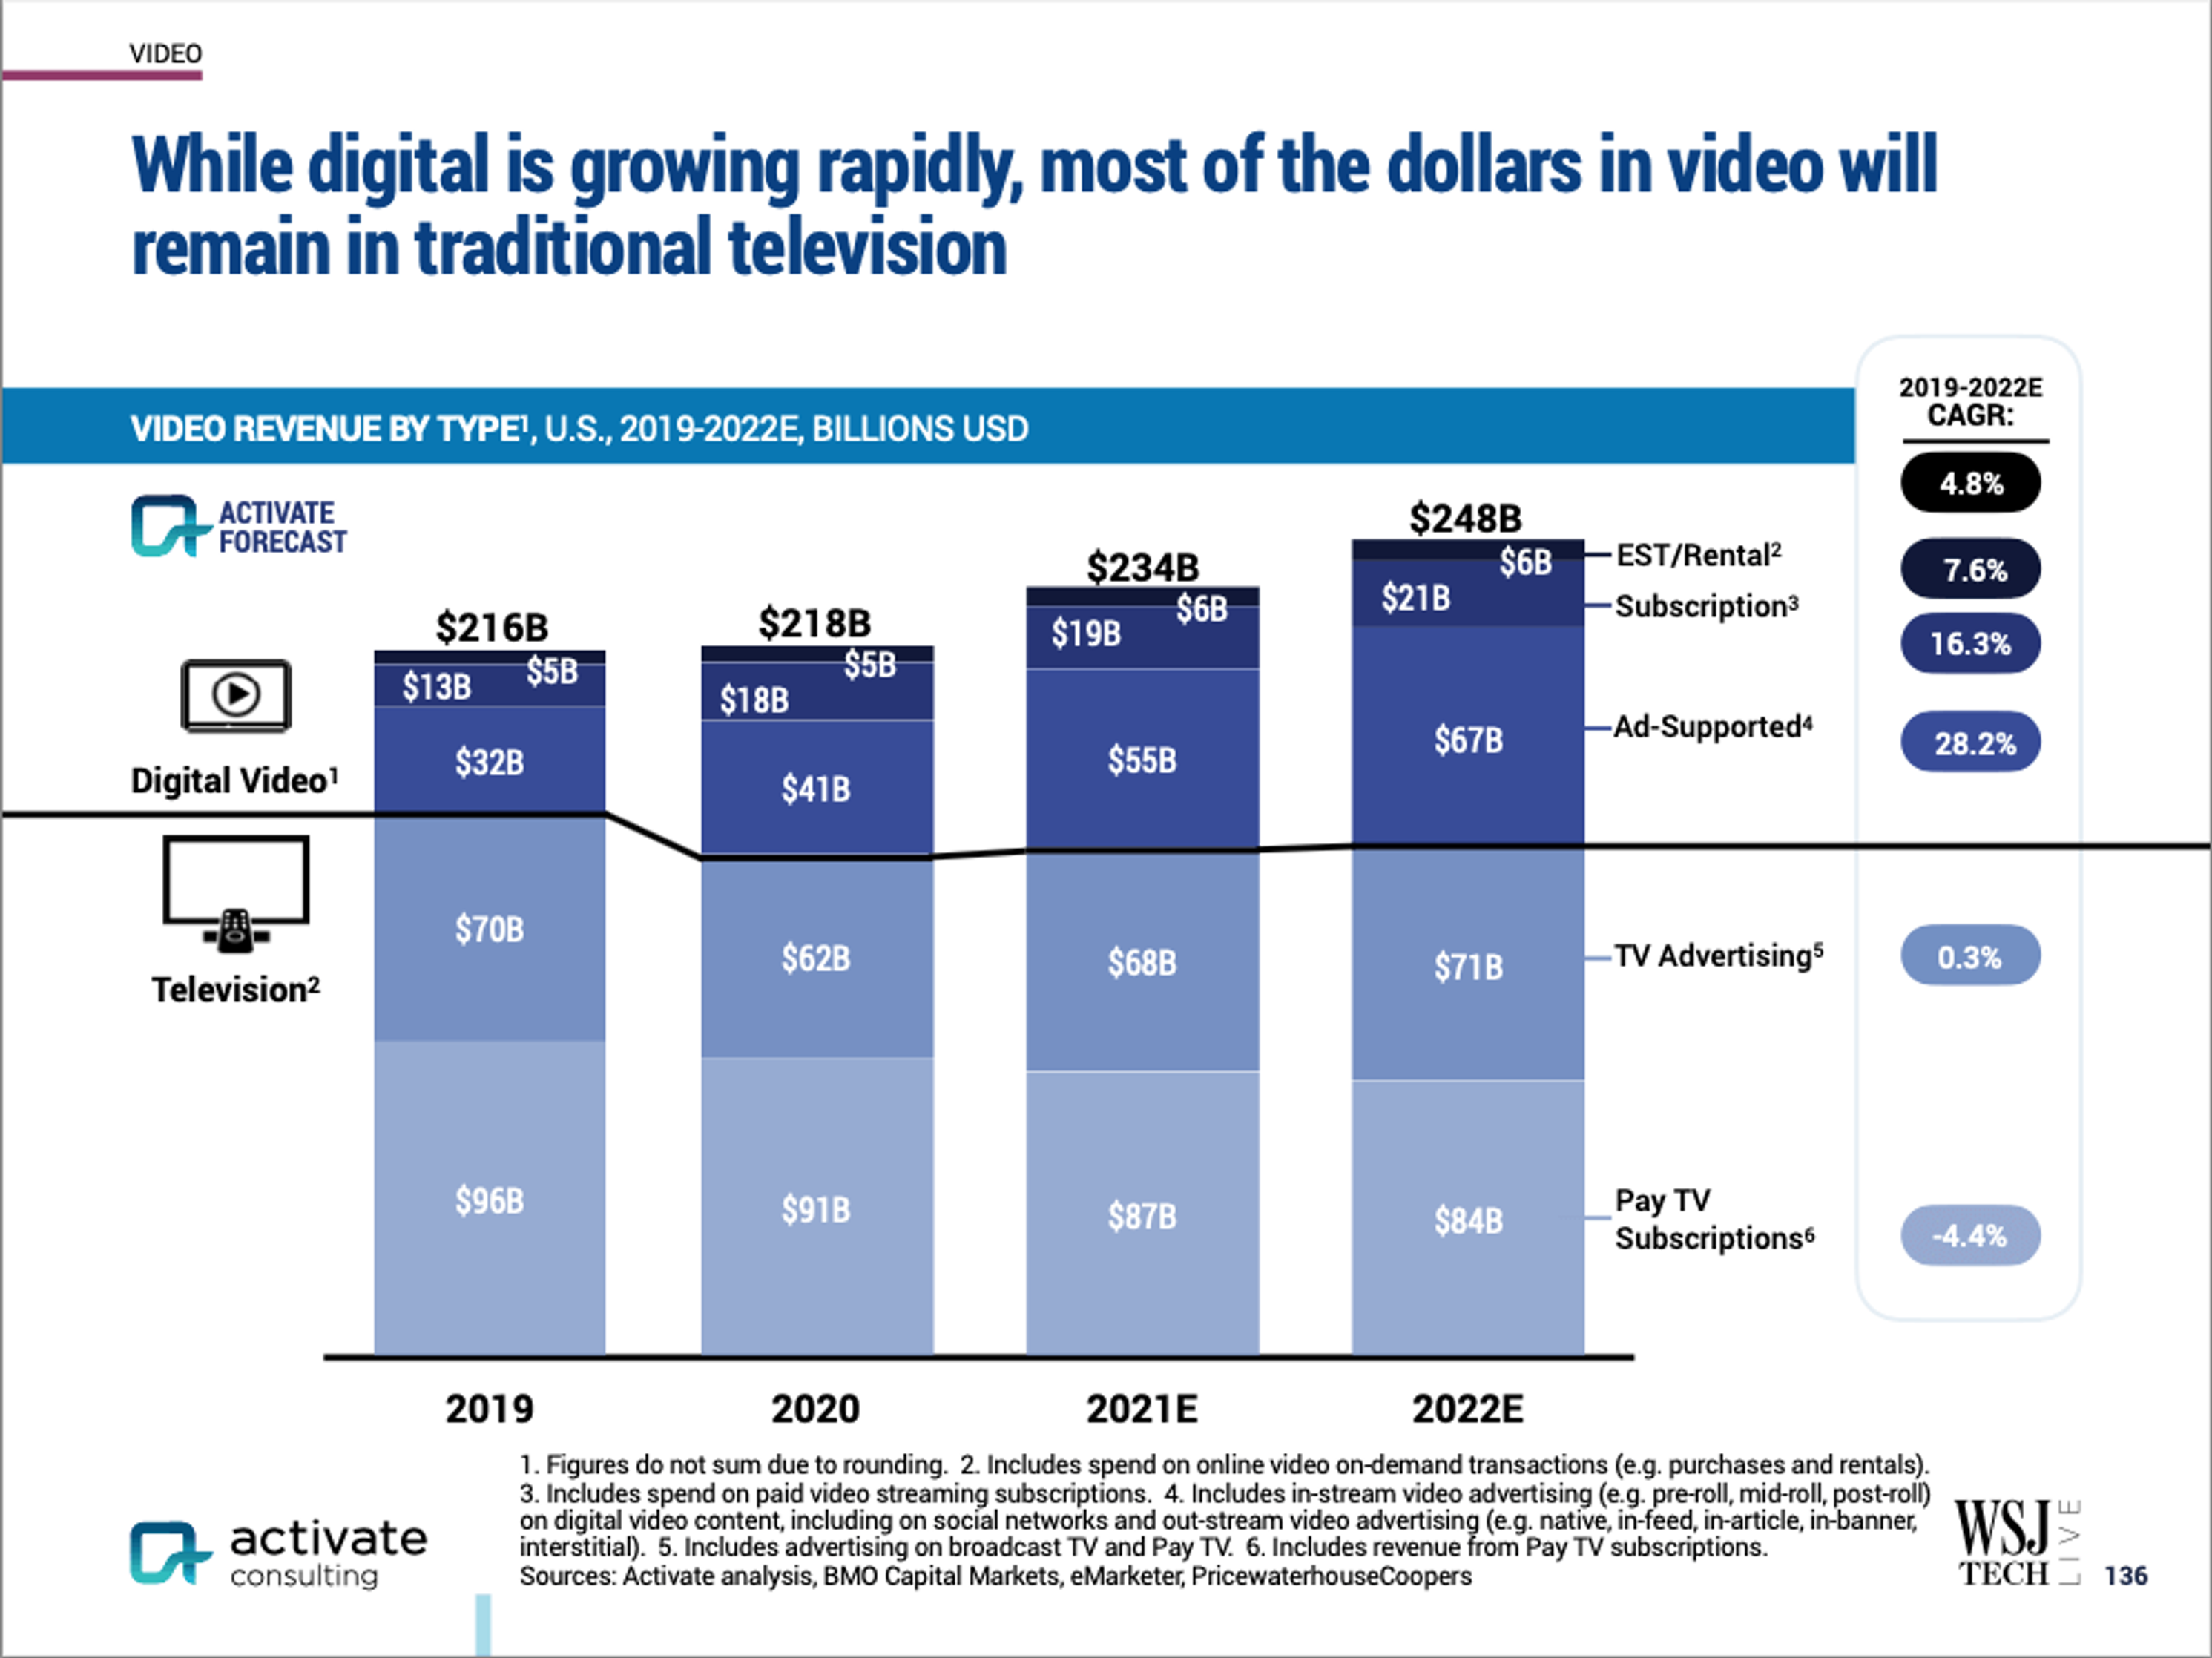 Most ad dollars will remain in traditional television